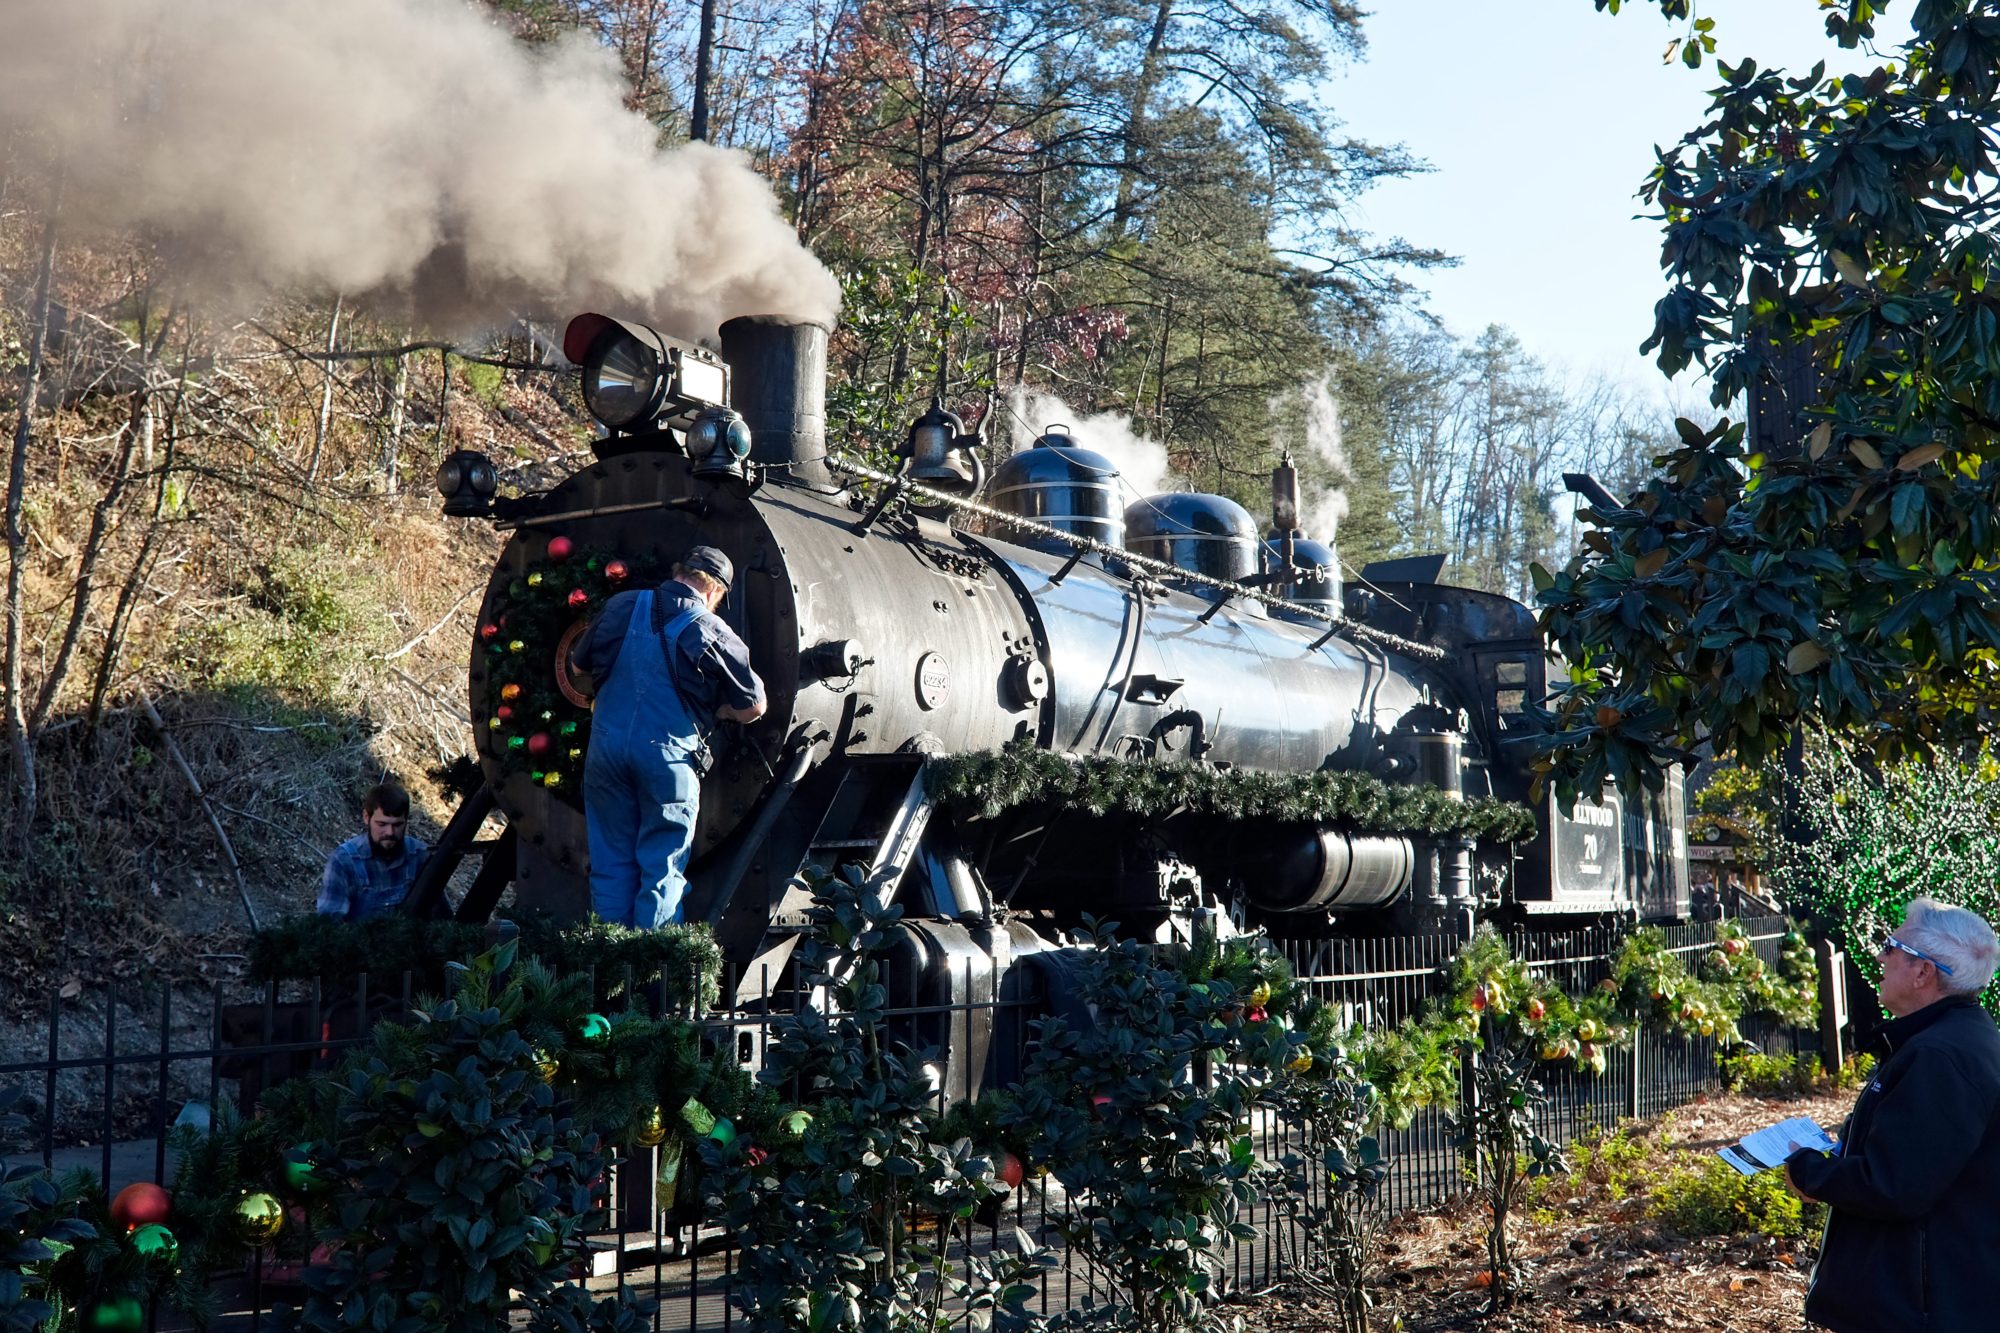 The conductor prepares the Dollywood train for a ride around the park